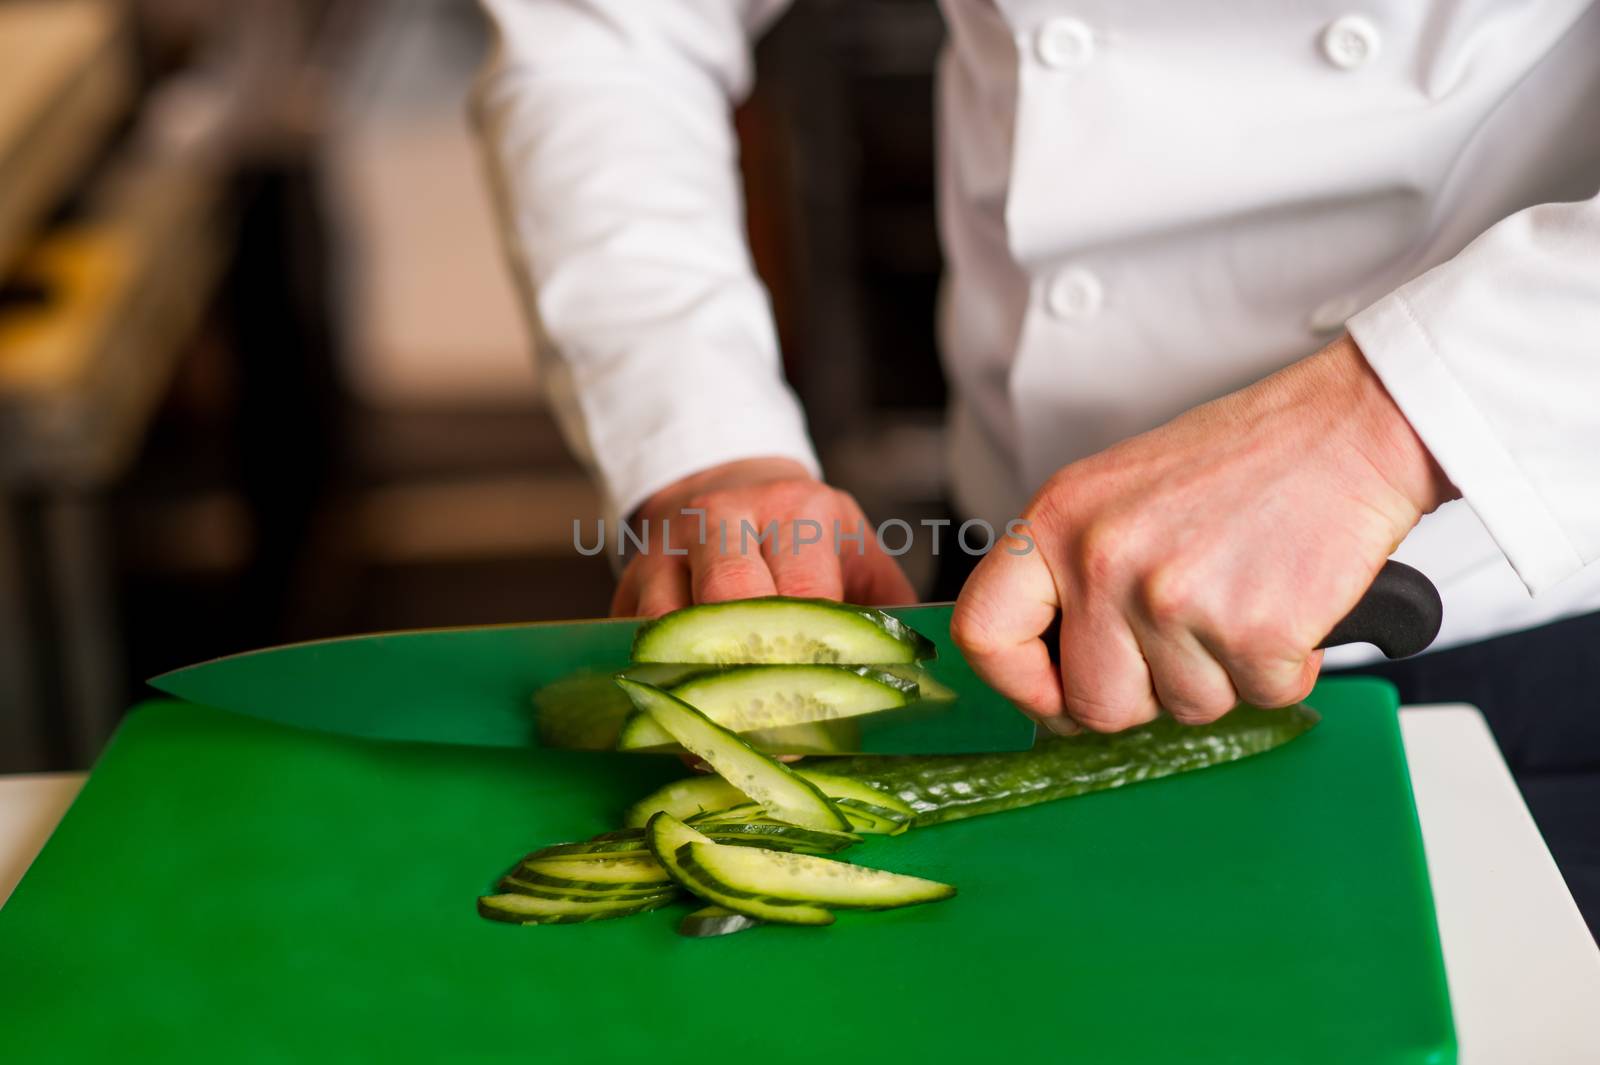 Chef chopping leek over green carving board by stockyimages